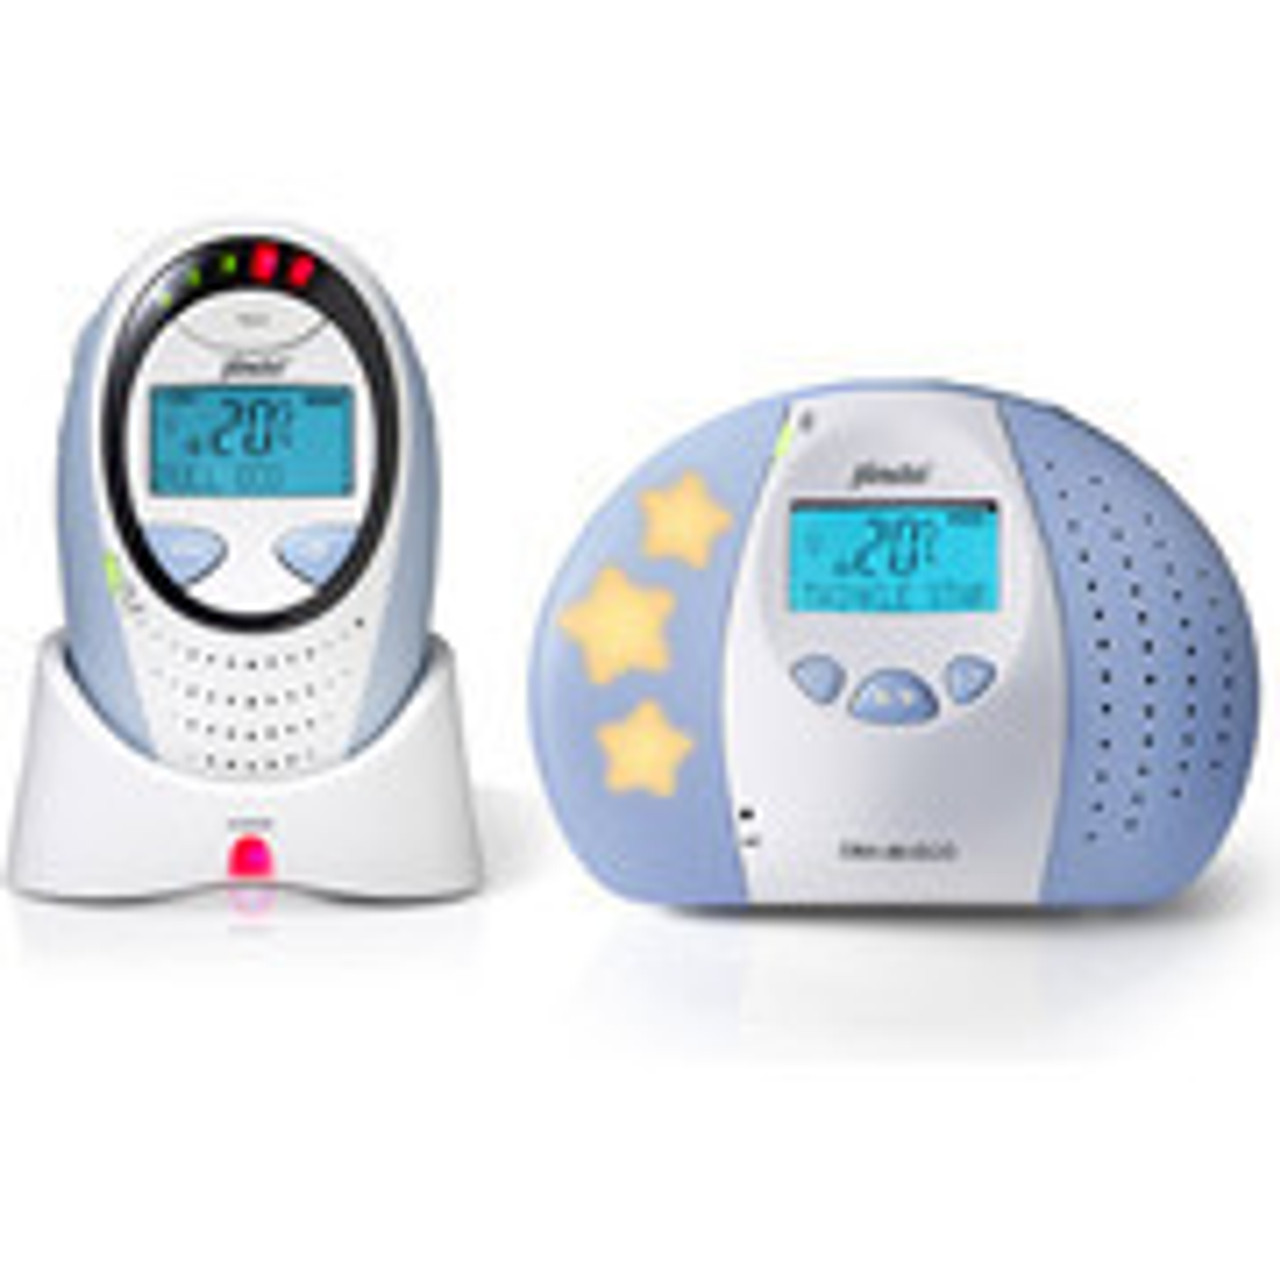 Alecto DBX-88 ECO Full Eco DECT Baby Monitor with Display - White/Blue 